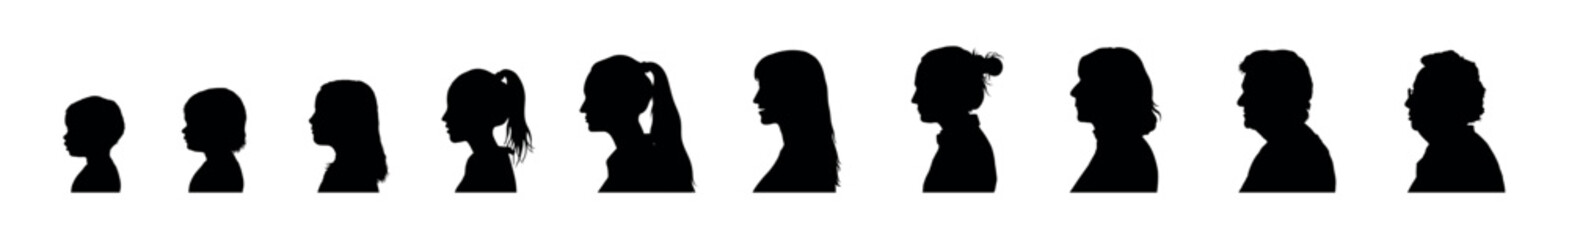 Woman life stages development vector silhouette set. Stages of woman growth and development face side profile silhouettes set collection.